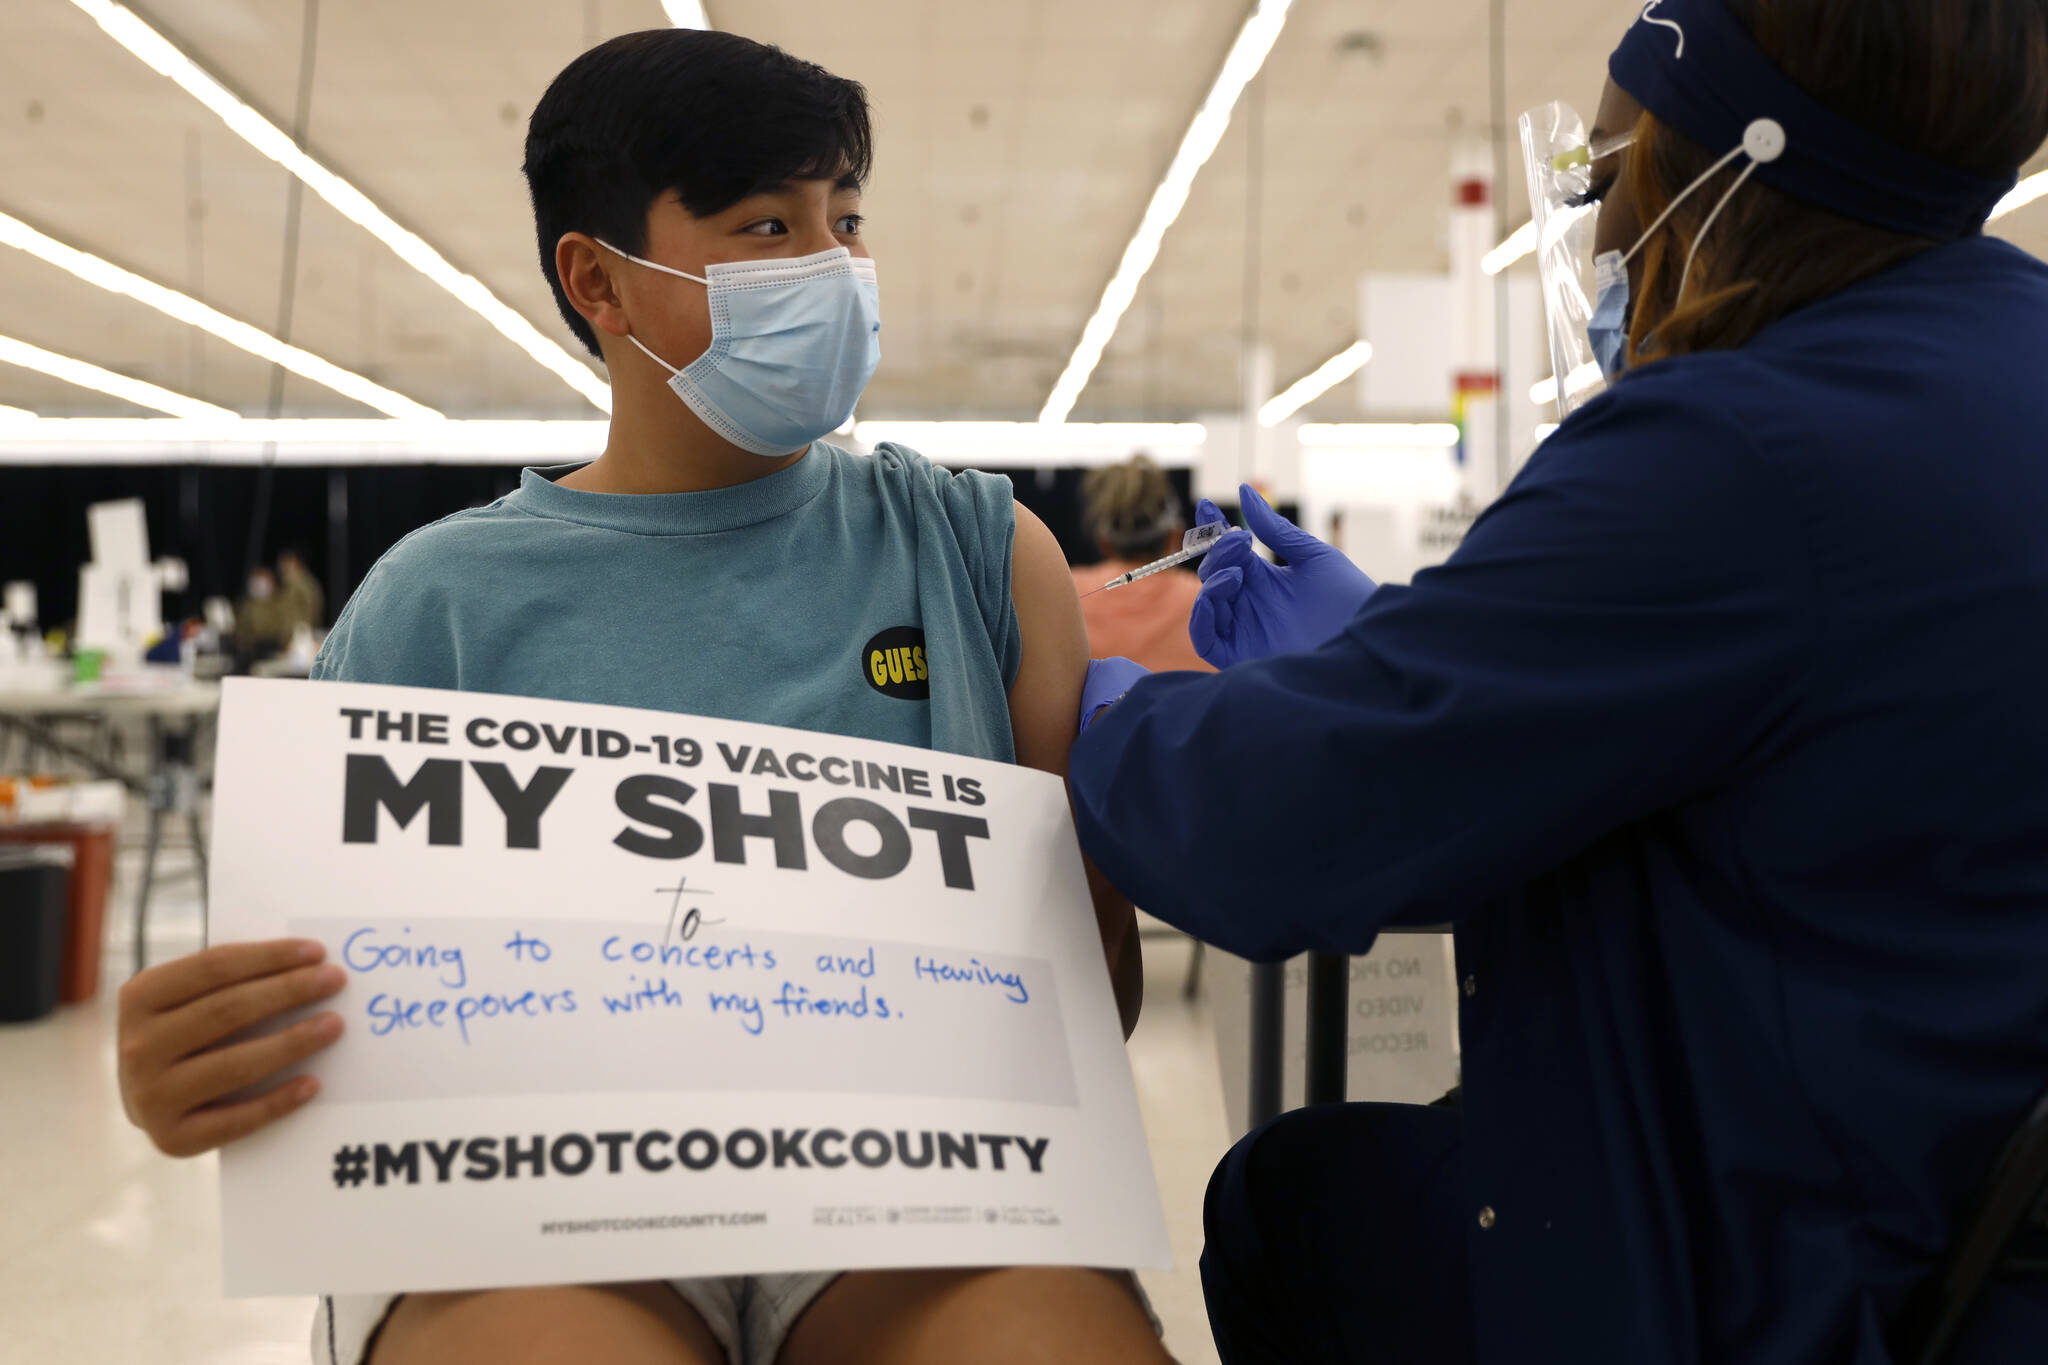 Lucas Kittikamron-Mora, 13, holds a sign in support of COVID-19 vaccinations as he receives his first Pfizer vaccination at the Cook County Public Health Department, May 13, 2021 in Des Plaines, Ill. The U.S. is expanding COVID-19 boosters as it confronts the omicron surge, with the Food and Drug Administration allowing extra Pfizer shots for children as young as 12. Boosters already are recommended for everyone 16 and older, and federal regulators on Monday, Jan. 3, 2022 decided they’re also warranted for 12- to 15-year-olds once enough time has passed since their last dose. (AP Photo / Shafkat Anowar)